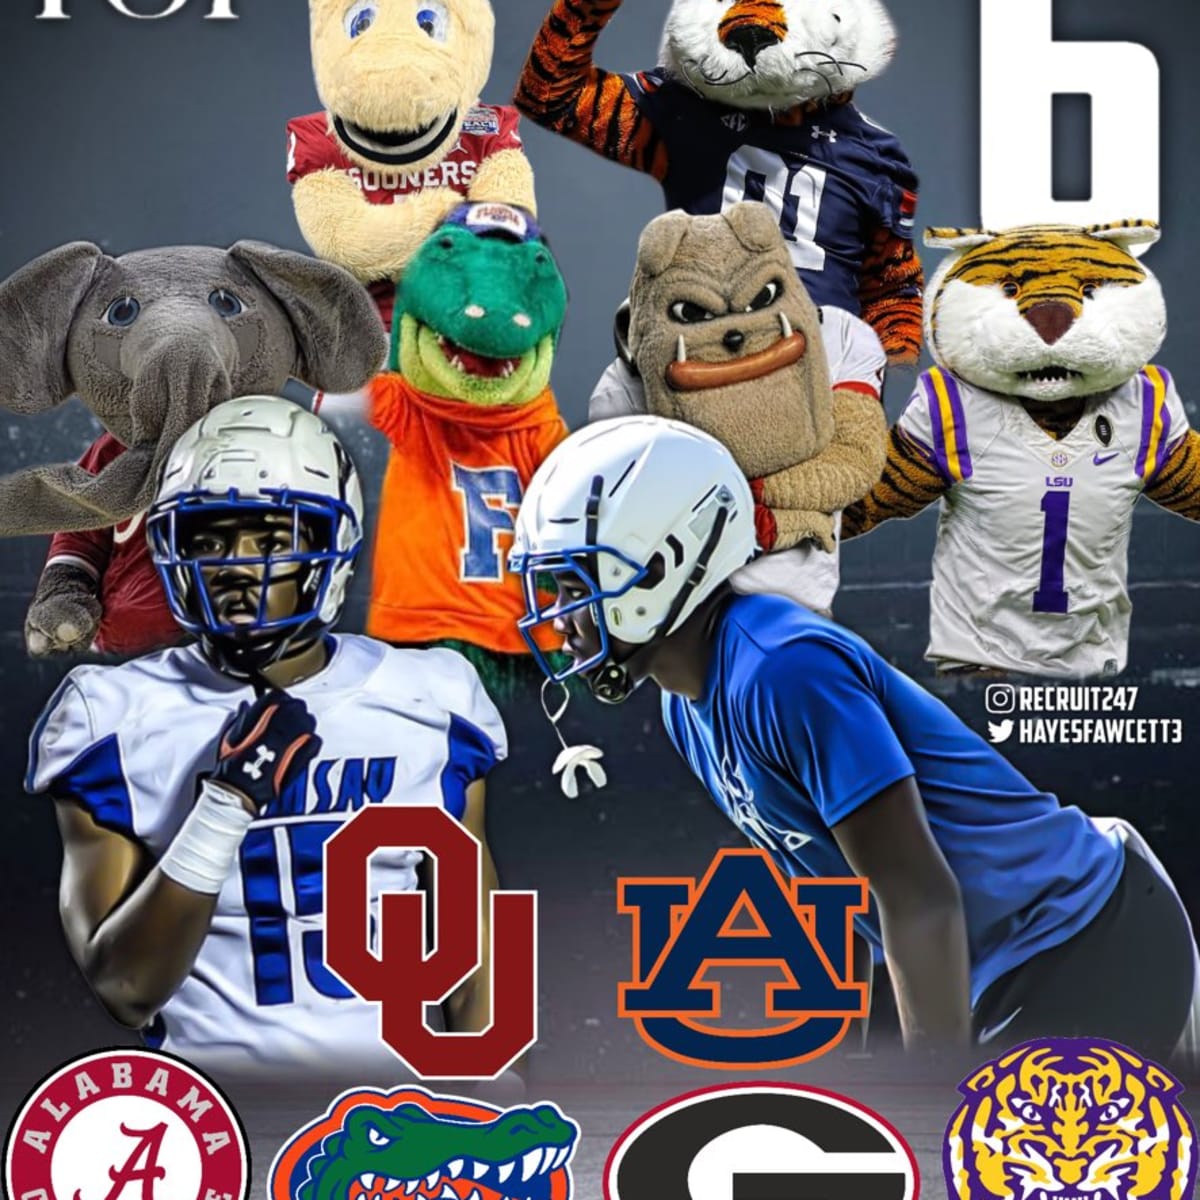 Ziaire Williams says he's still considering six schools, in no rush to